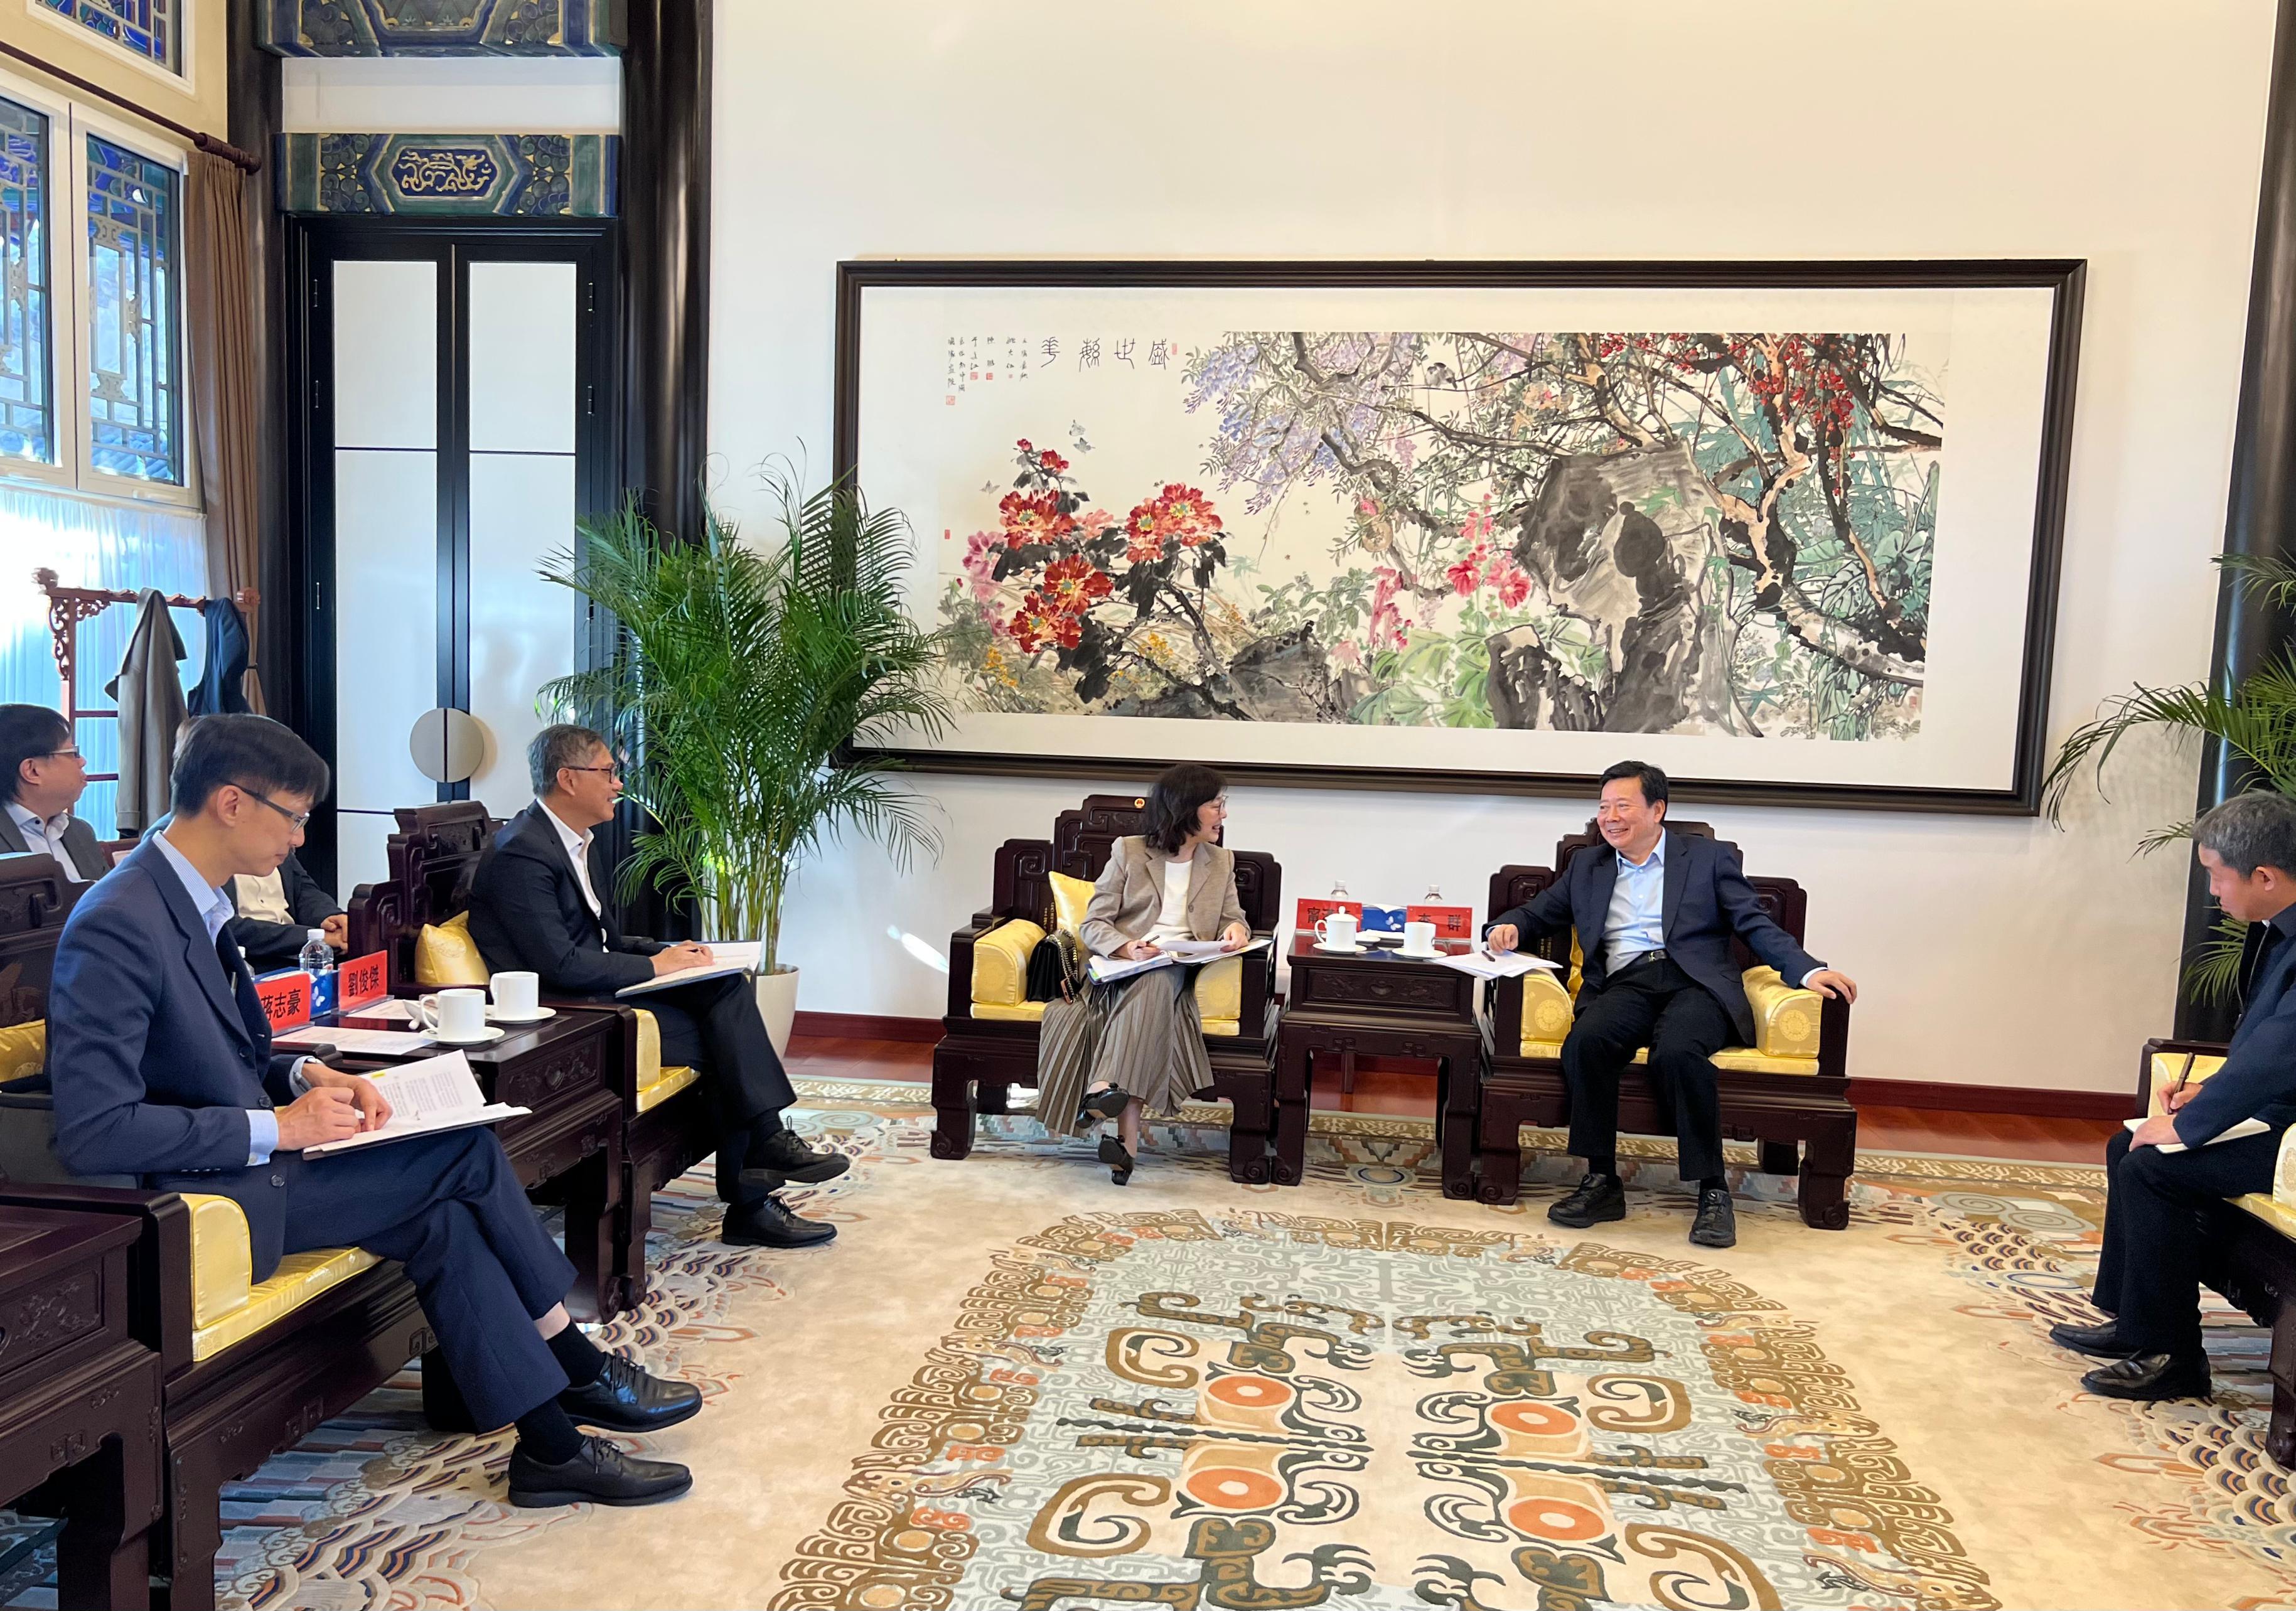 The Secretary for Development, Ms Bernadette Linn (third right), met with the Vice Minister of Culture and Tourism and Administrator of the National Cultural Heritage Administration, Mr Li Qun (second right), in Beijing today (November 9). The Permanent Secretary for Development (Works), Mr Ricky Lau (third left), and the Commissioner for Heritage, Mr Ivanhoe Chang (second left), also attended.